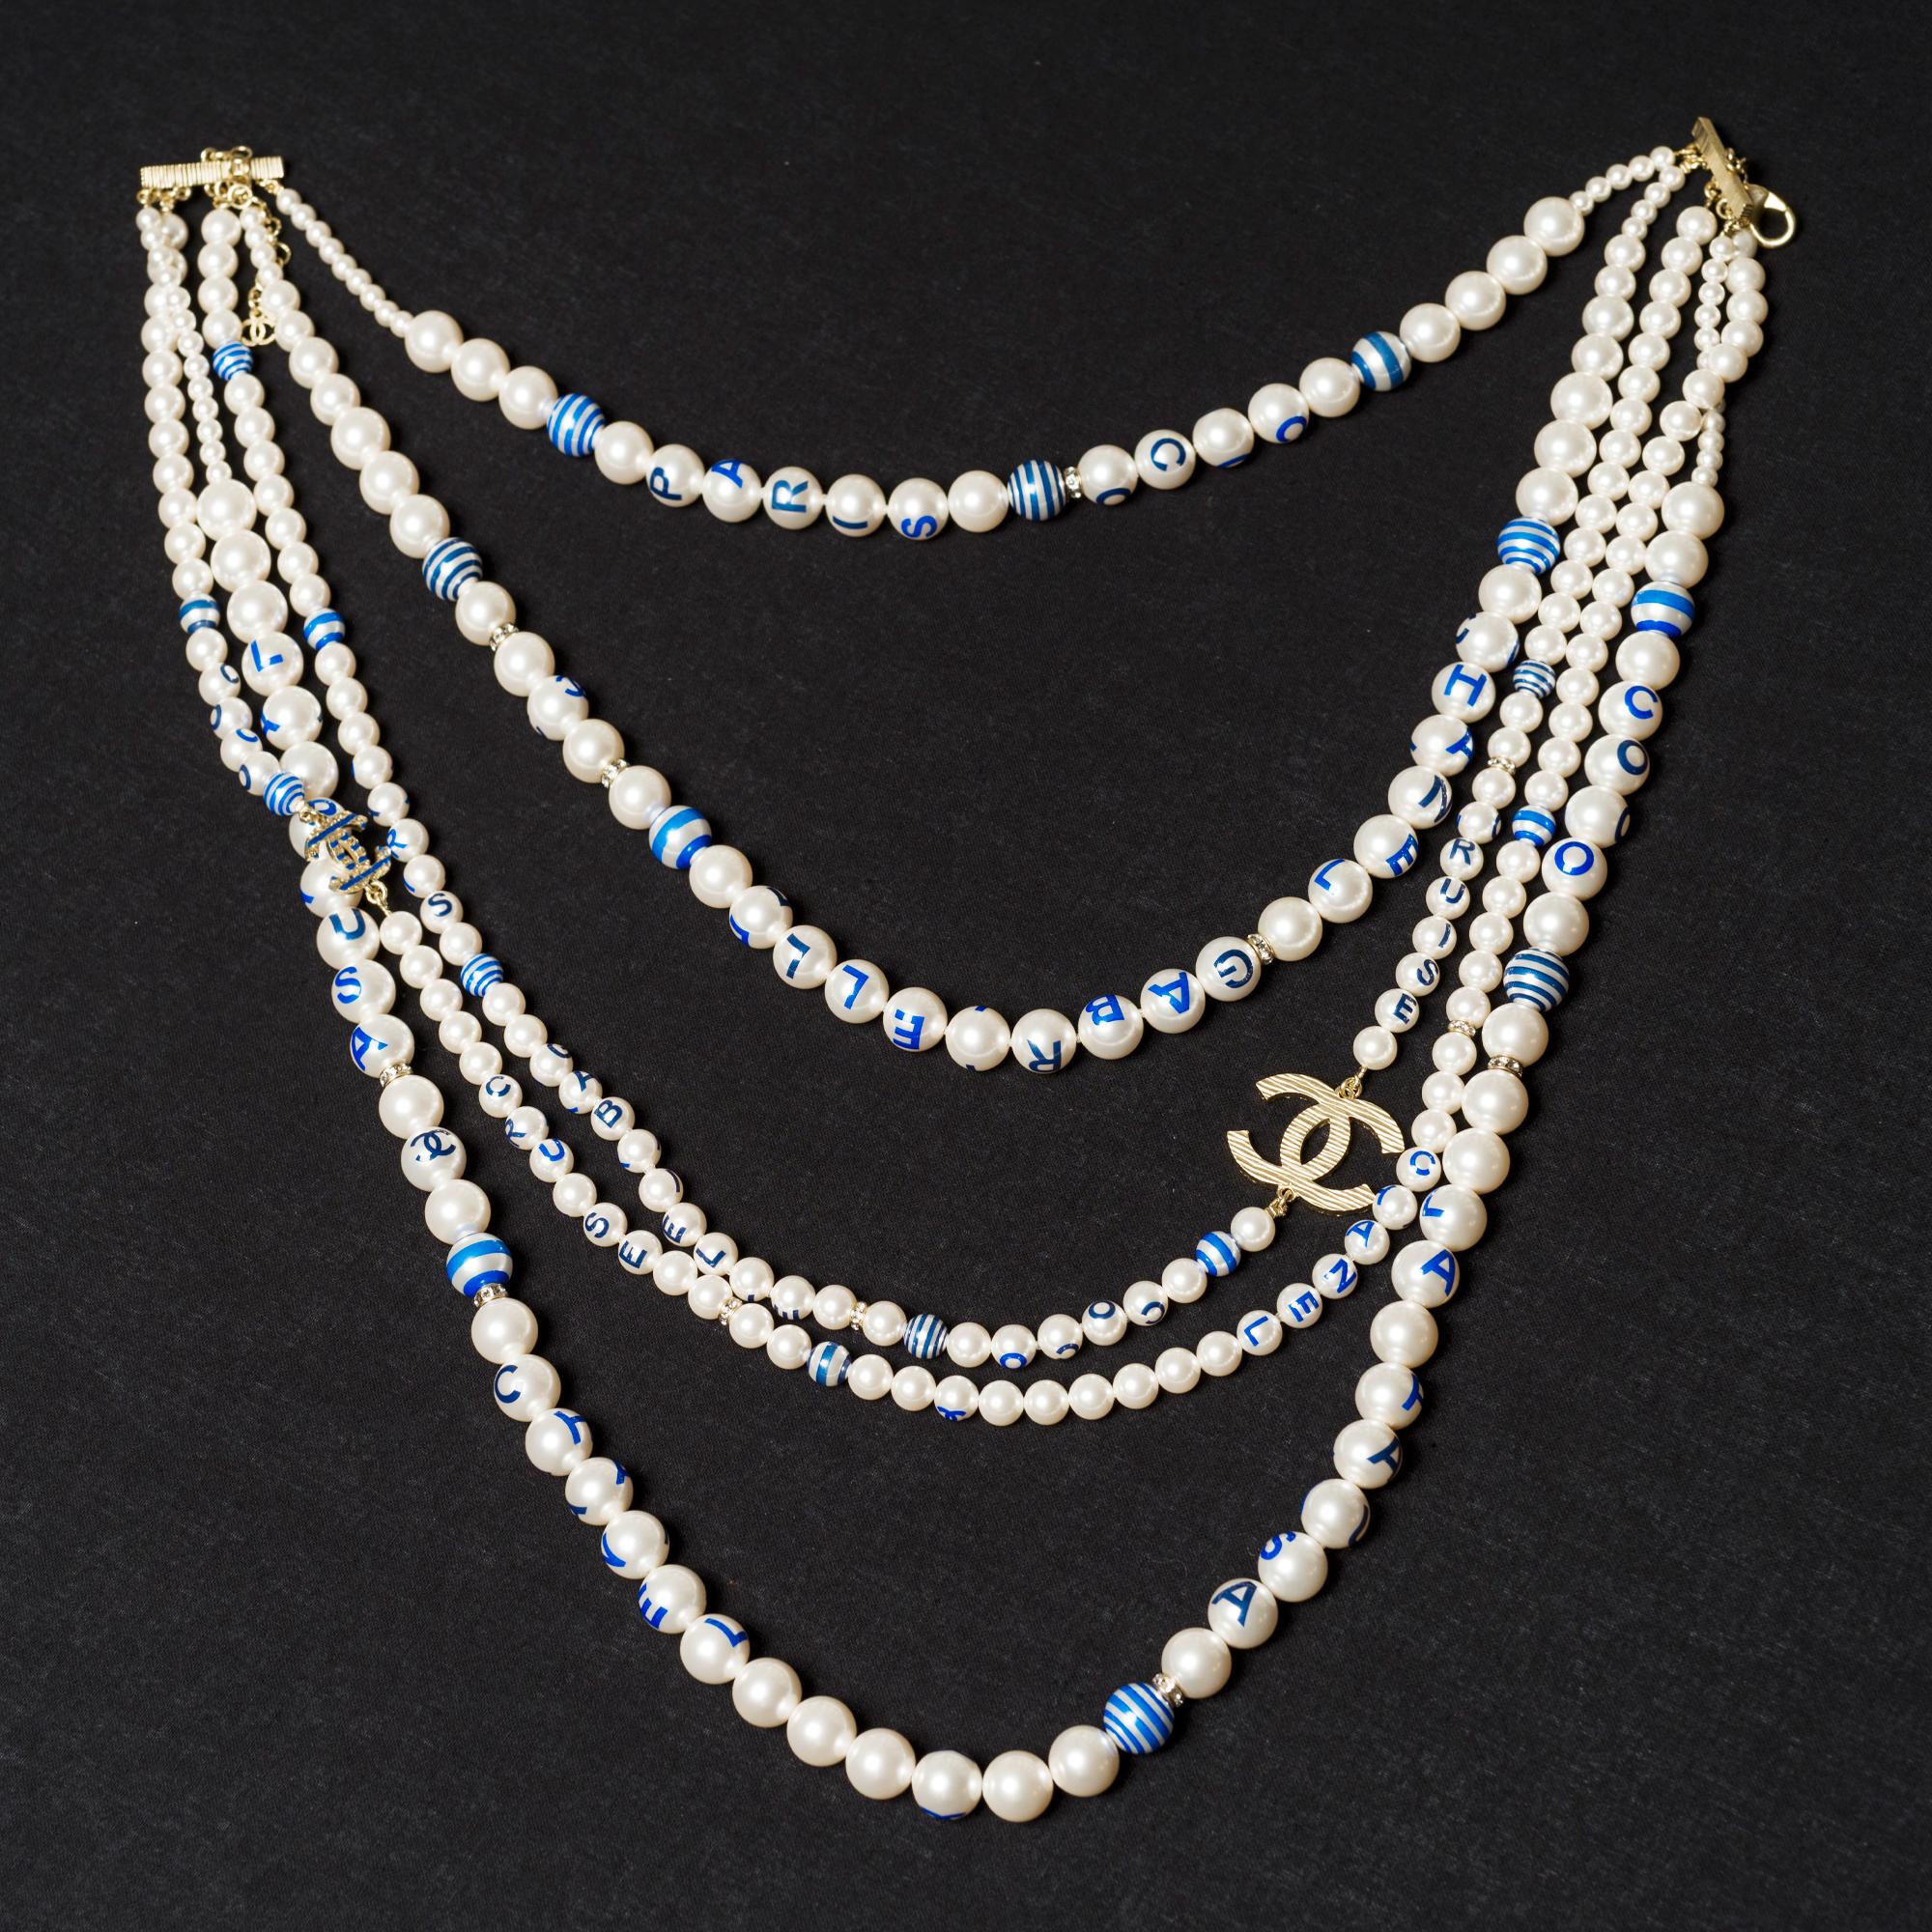 Chanel​ ​CC​ ​long​ ​necklace​ ​in​ ​white​ ​pearly​ ​pearls​ ​and​ ​gold​ ​metal​ ​with​ ​blue​ ​inscriptions​ ​in​ ​5​ ​rows

Length:​ ​37cm

Reference:​ ​101449

General​ ​condition:​ ​7.5/10
Sold​ ​with​ ​box